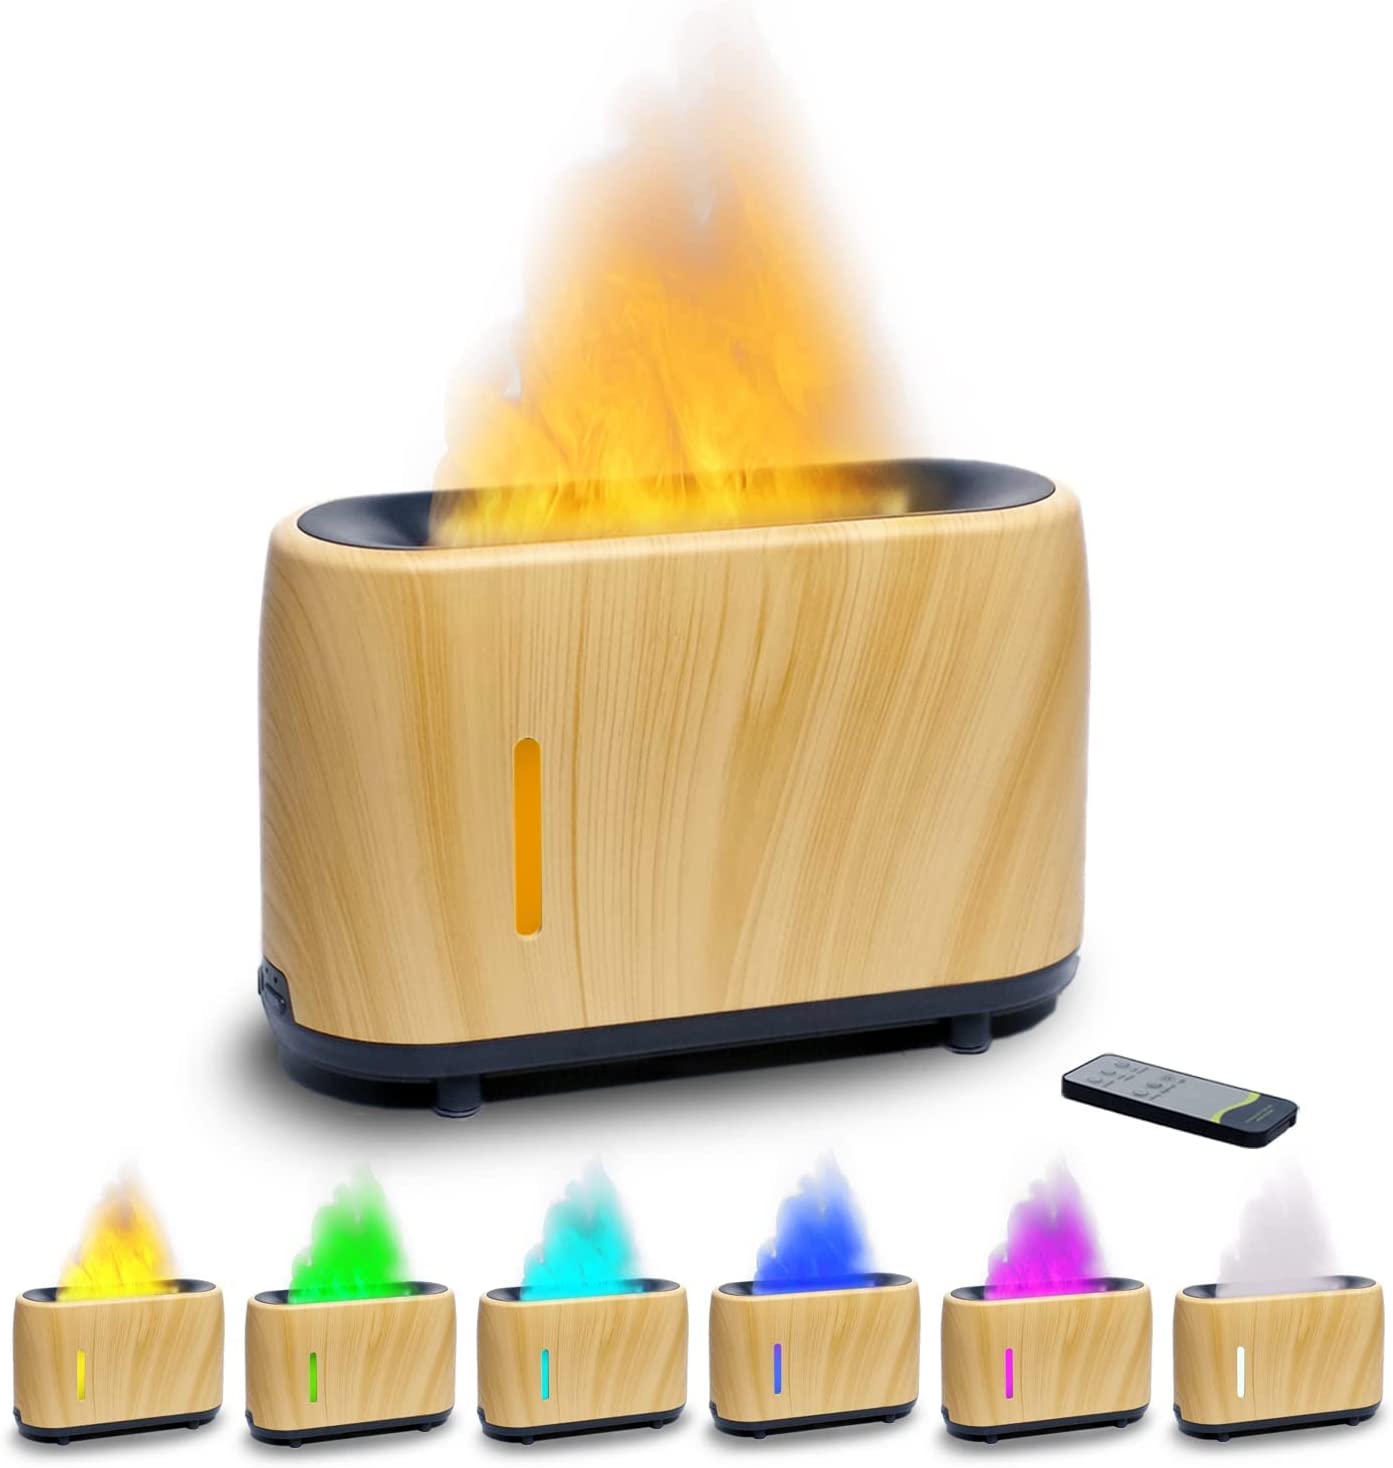 Colorful Flame Air Aroma Diffuser Humidifier, Upgraded 7 Flame Colors  Noiseless Essential Oil Diffuser for Home,Office,Yoga with Auto-Off  Protection